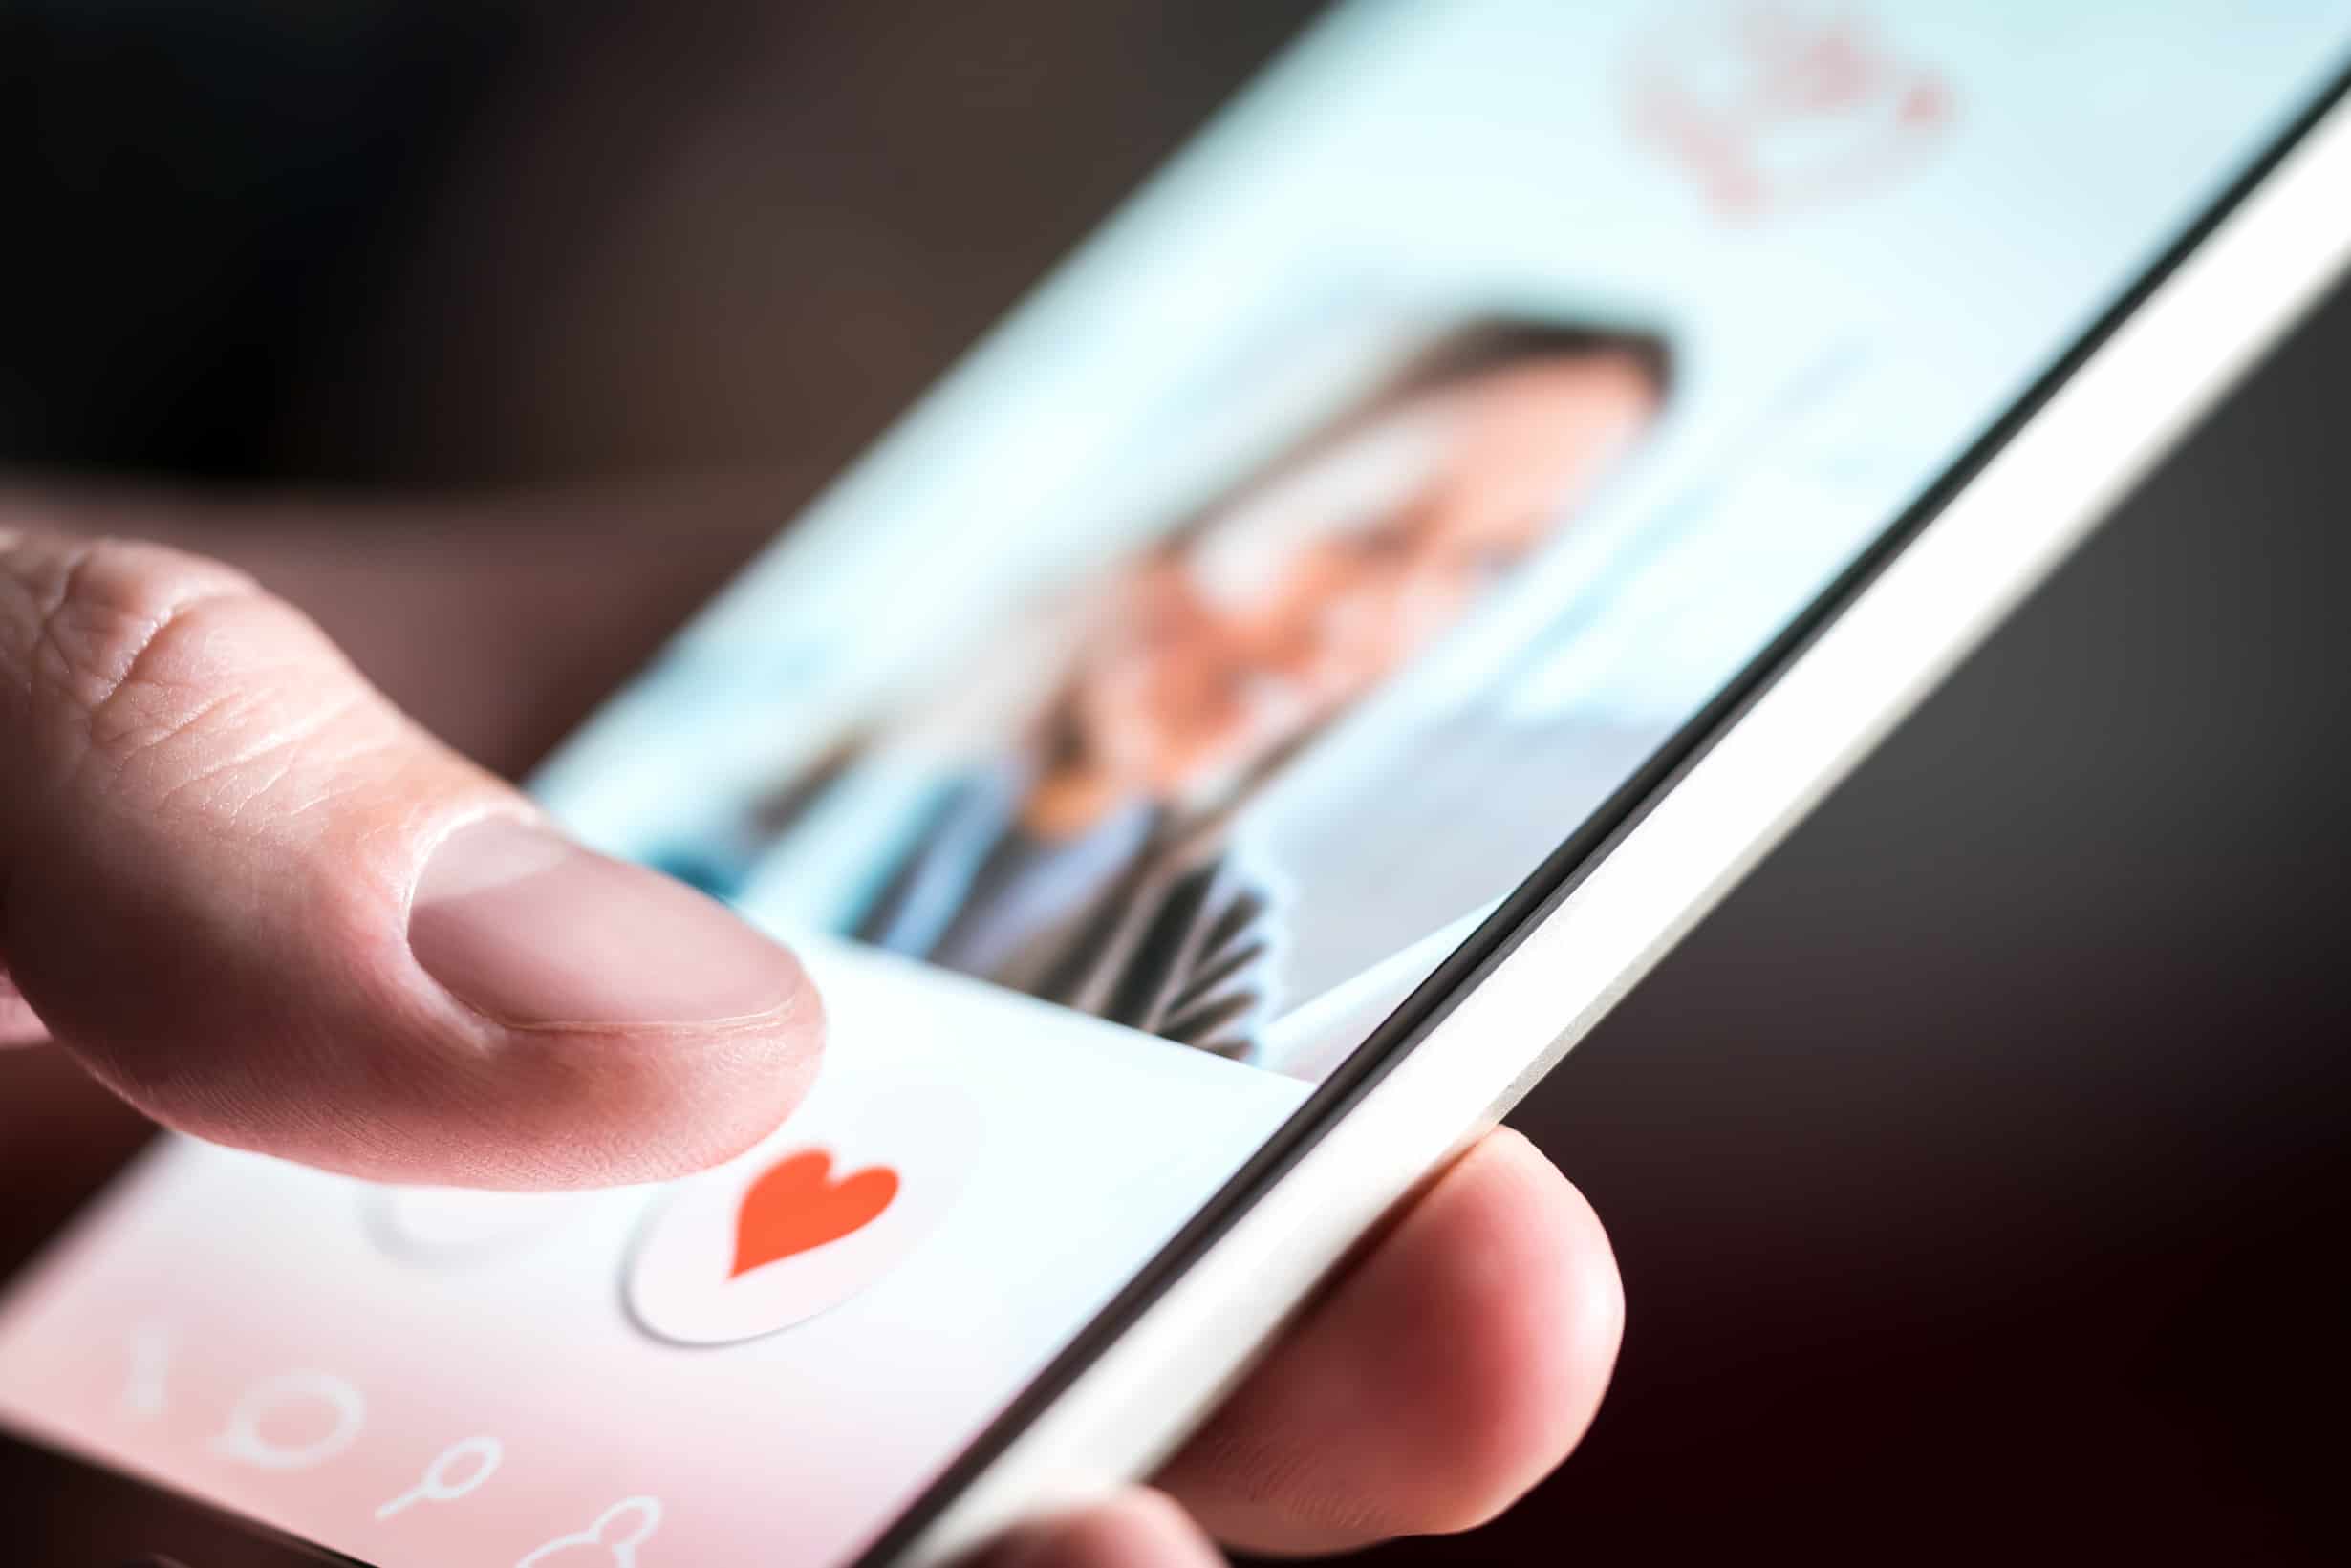 'The League' Joins the League of Match Group's Dating Apps